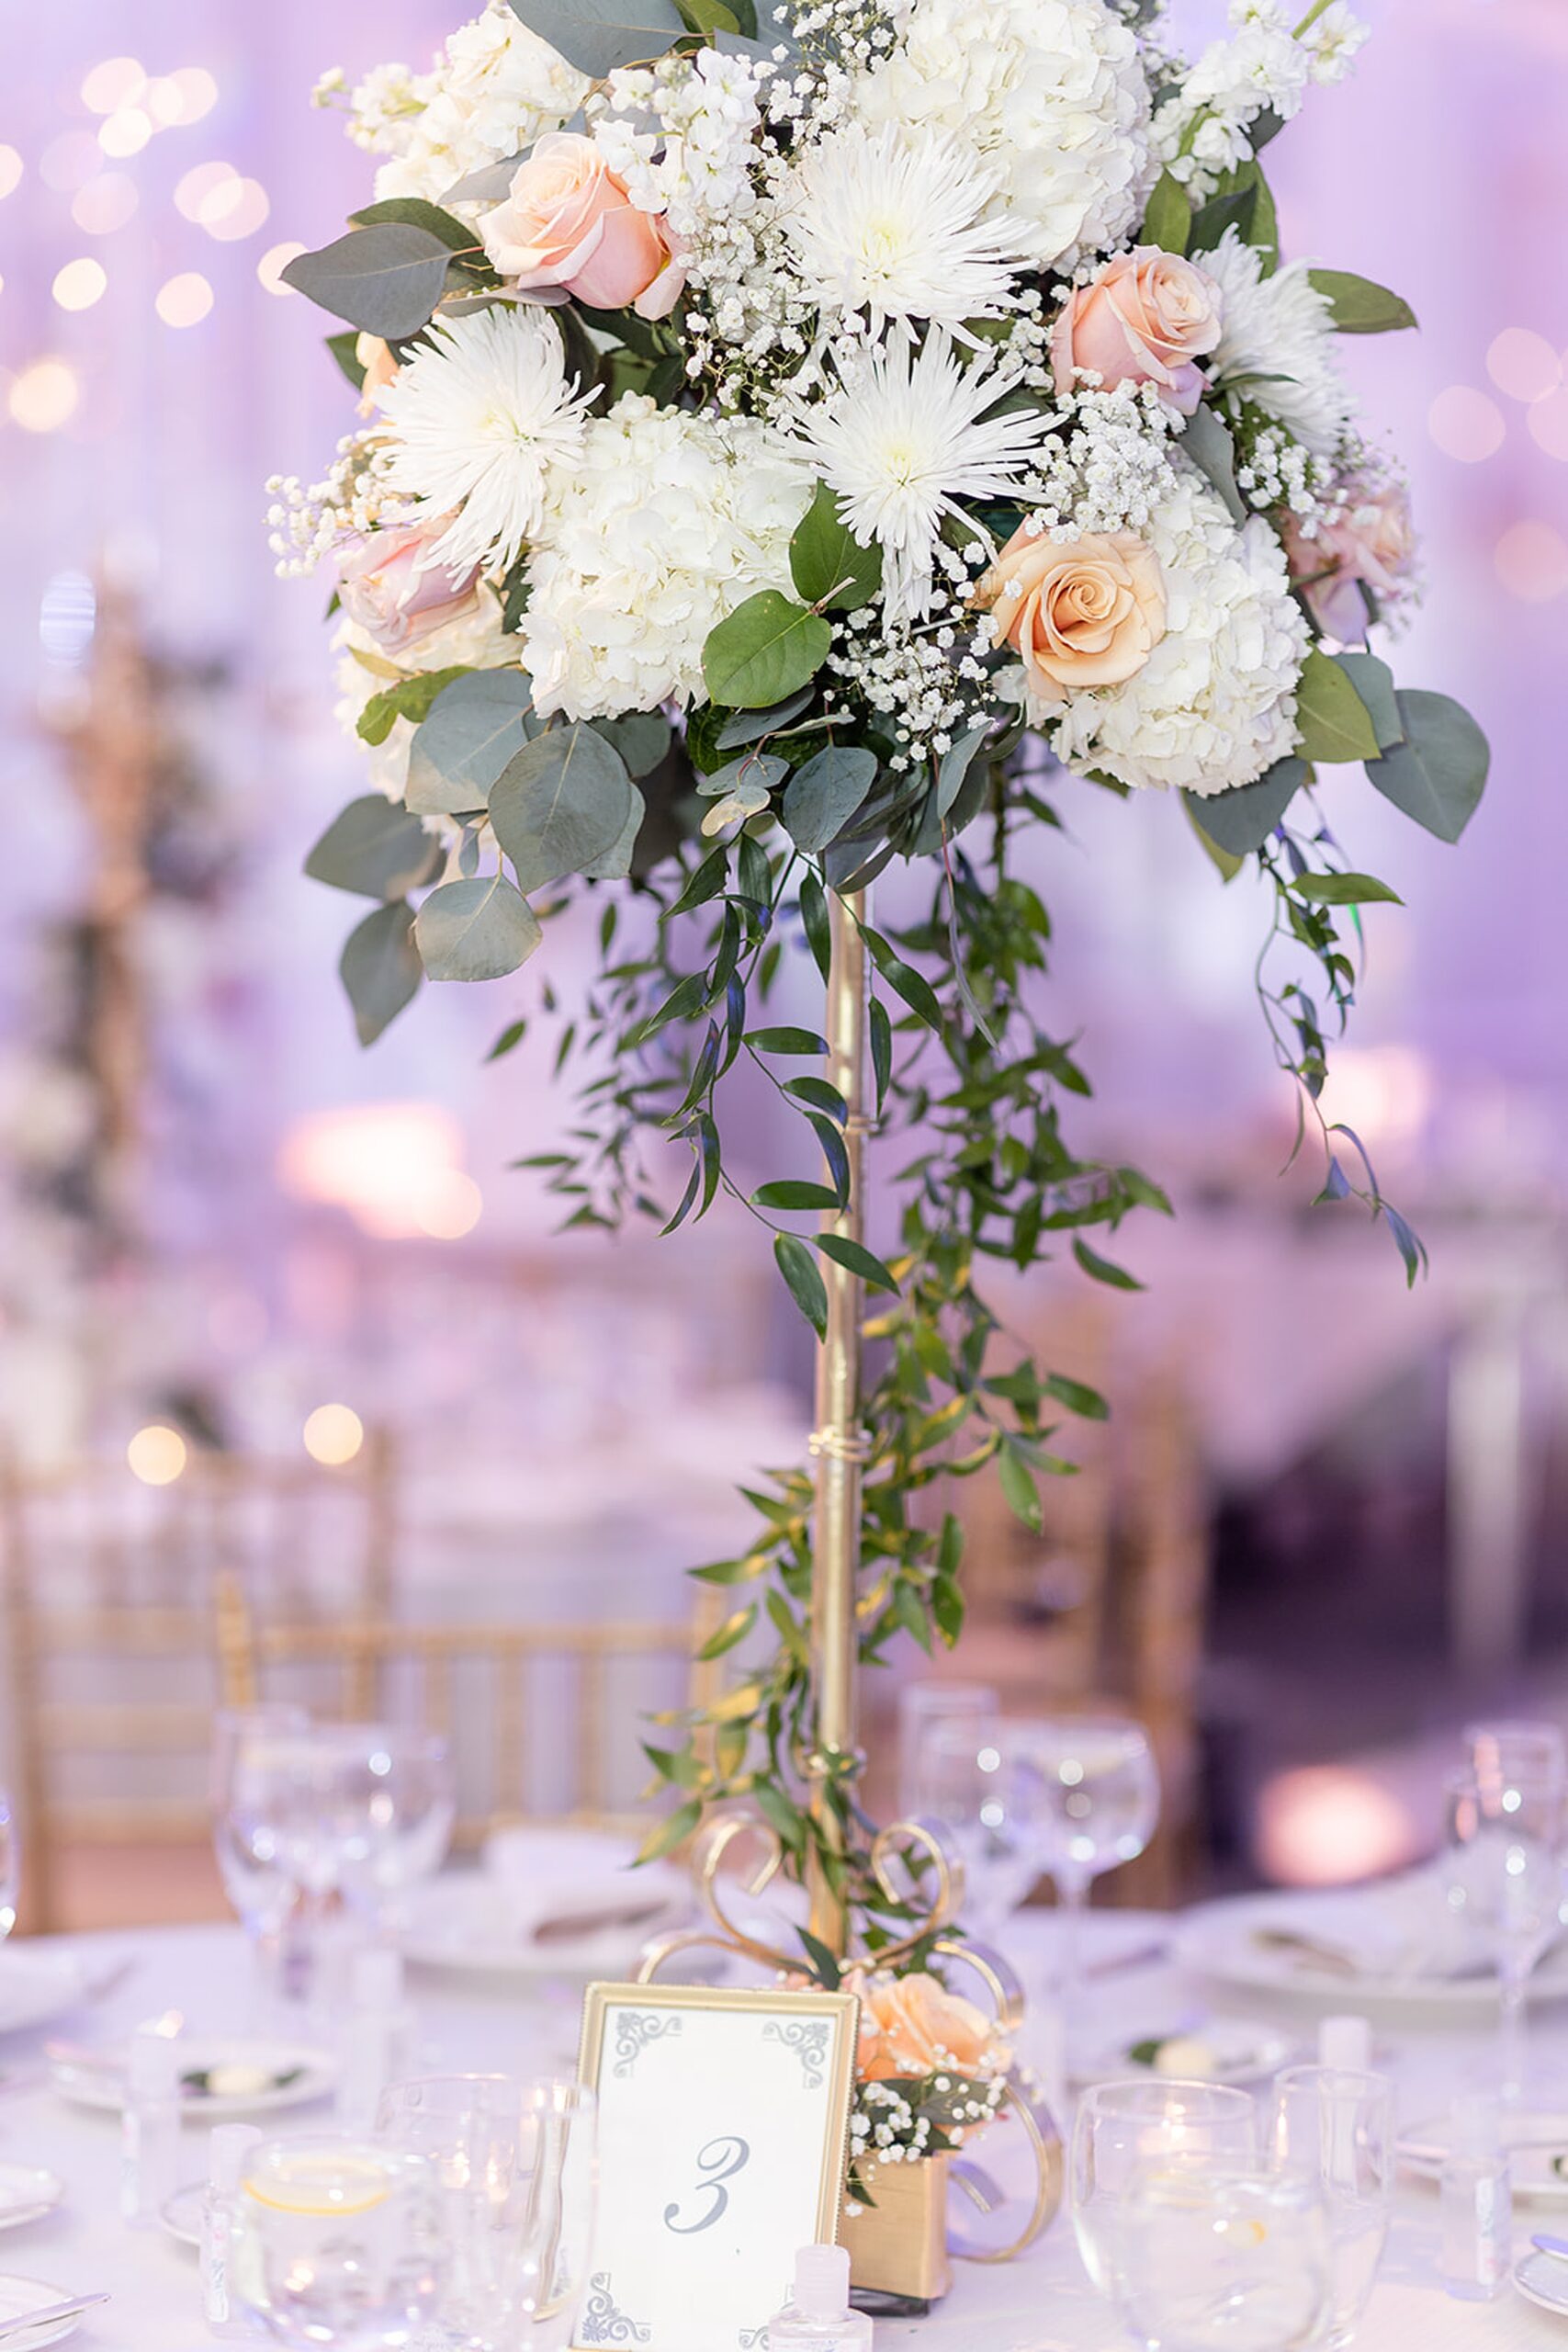 Details of a table setting and tall white flower centerpiece at a wedding reception